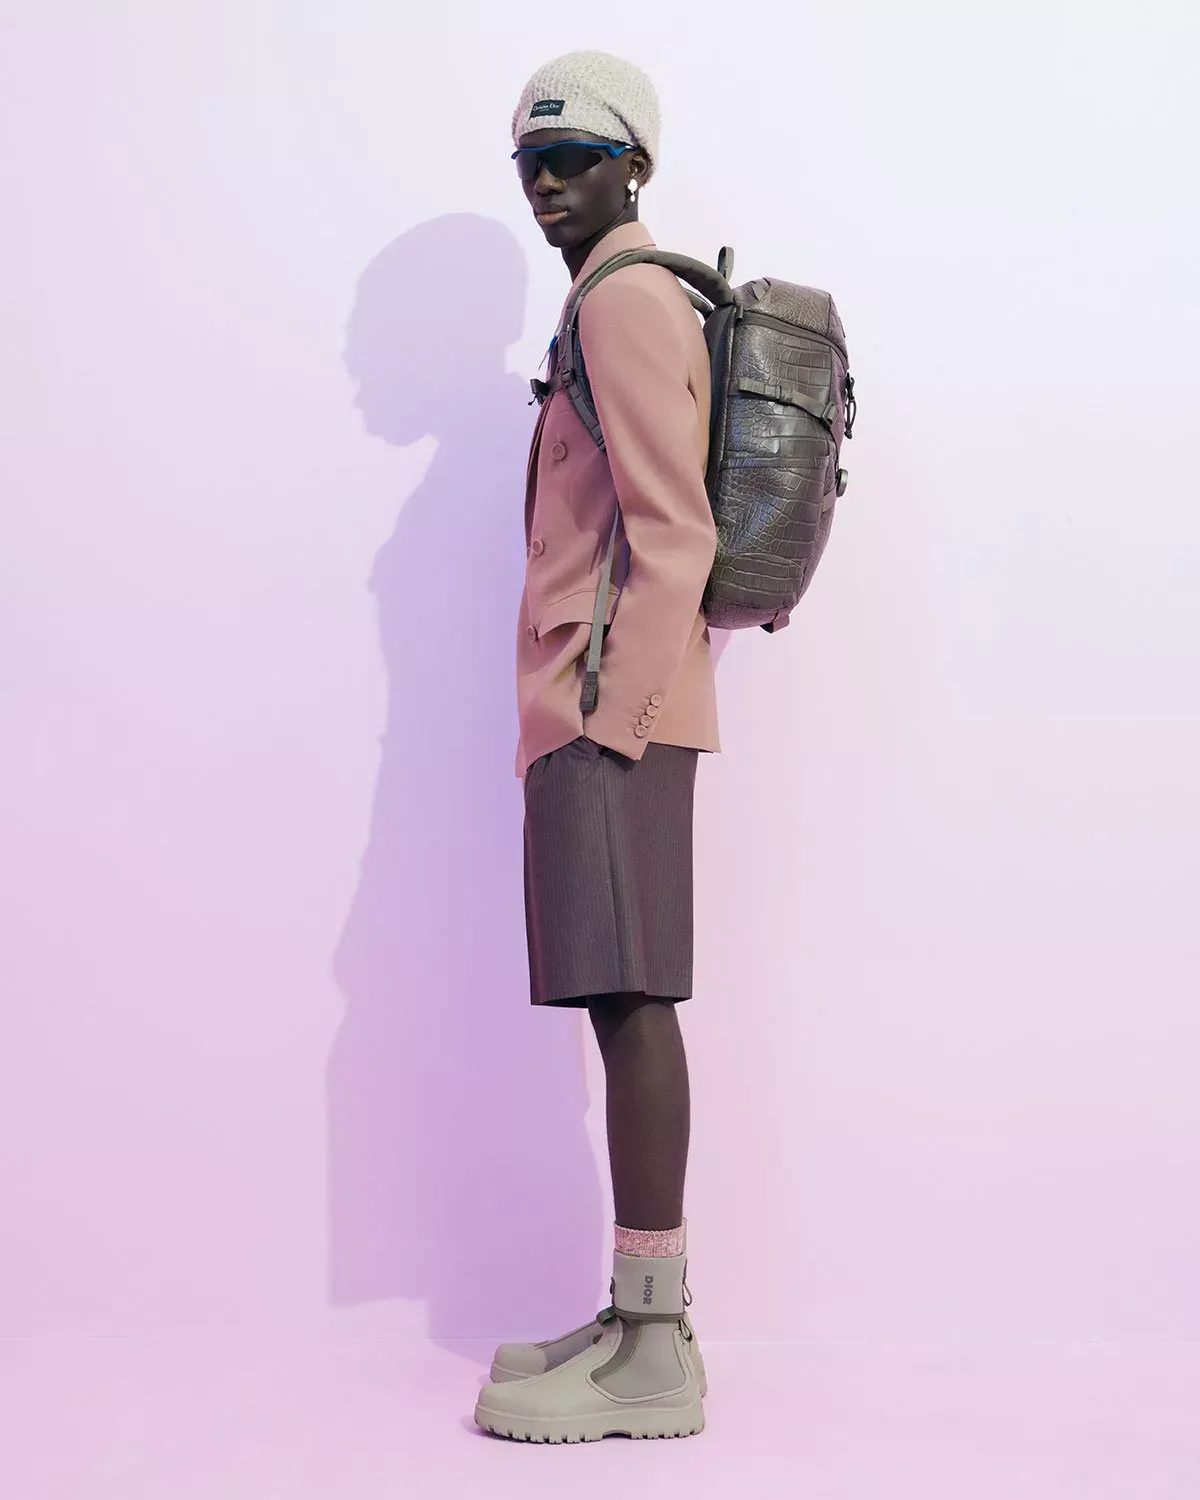 Dior launches new bags in collaboration with Mystery Ranch that combine outdoor culture with luxury requirements Kim Jones, with his Dior Men's Summer 2023 collection, pays homage to Monsieur Dior's passion for nature, and joins forces for the first time, with Mystery Ranch, combining outdoor culture with the requirements of luxury.